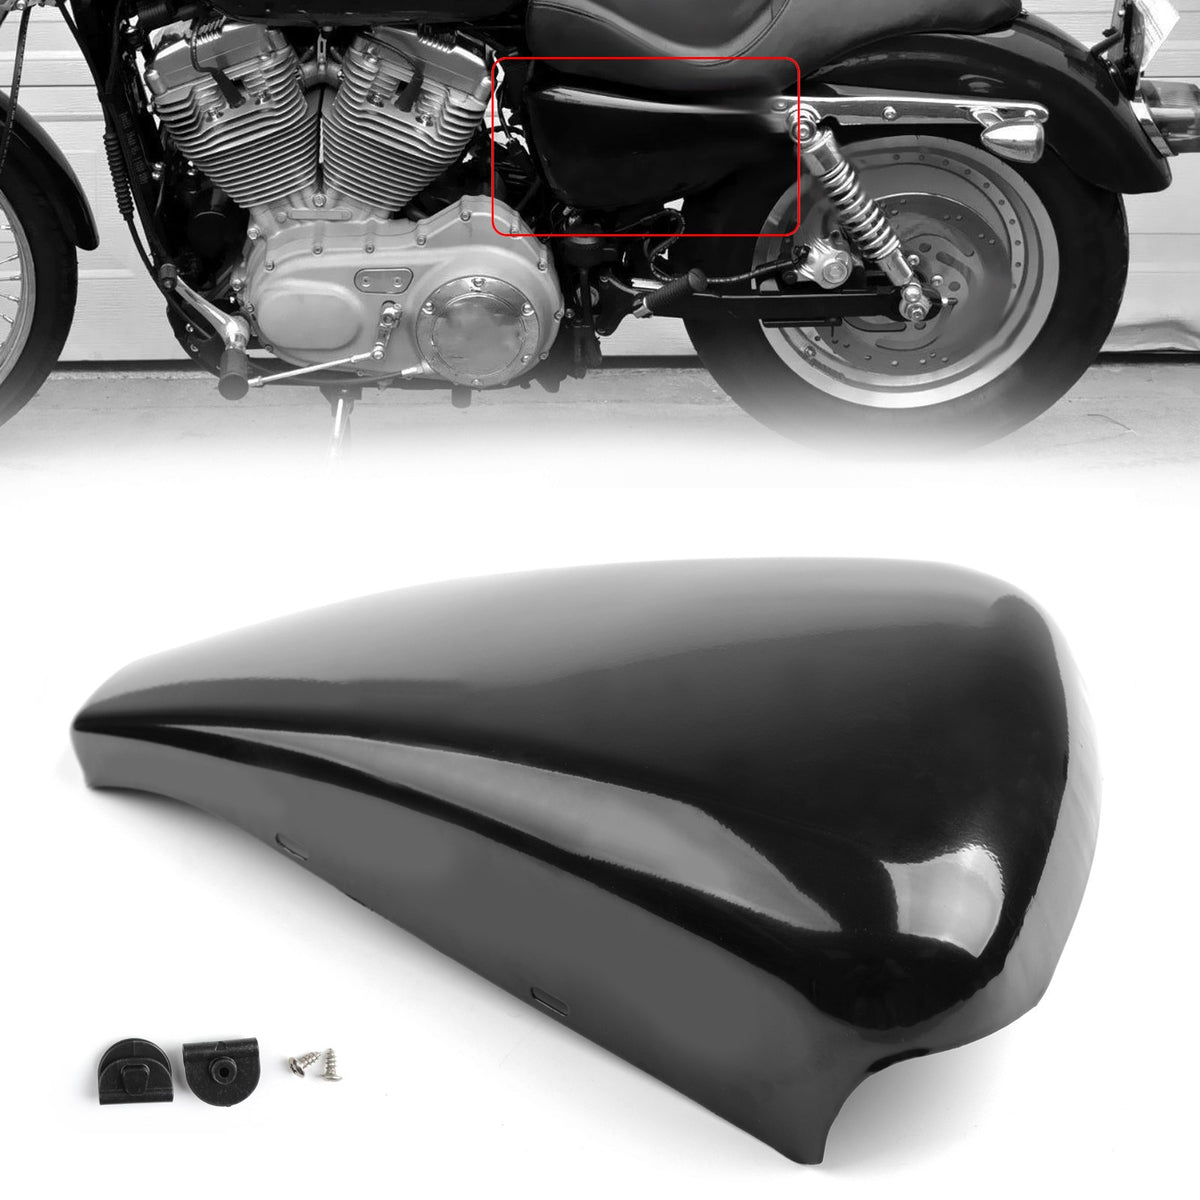 1 piece Left Side Battery Cover For Sportster XL Iron 883 1200 2014-2018